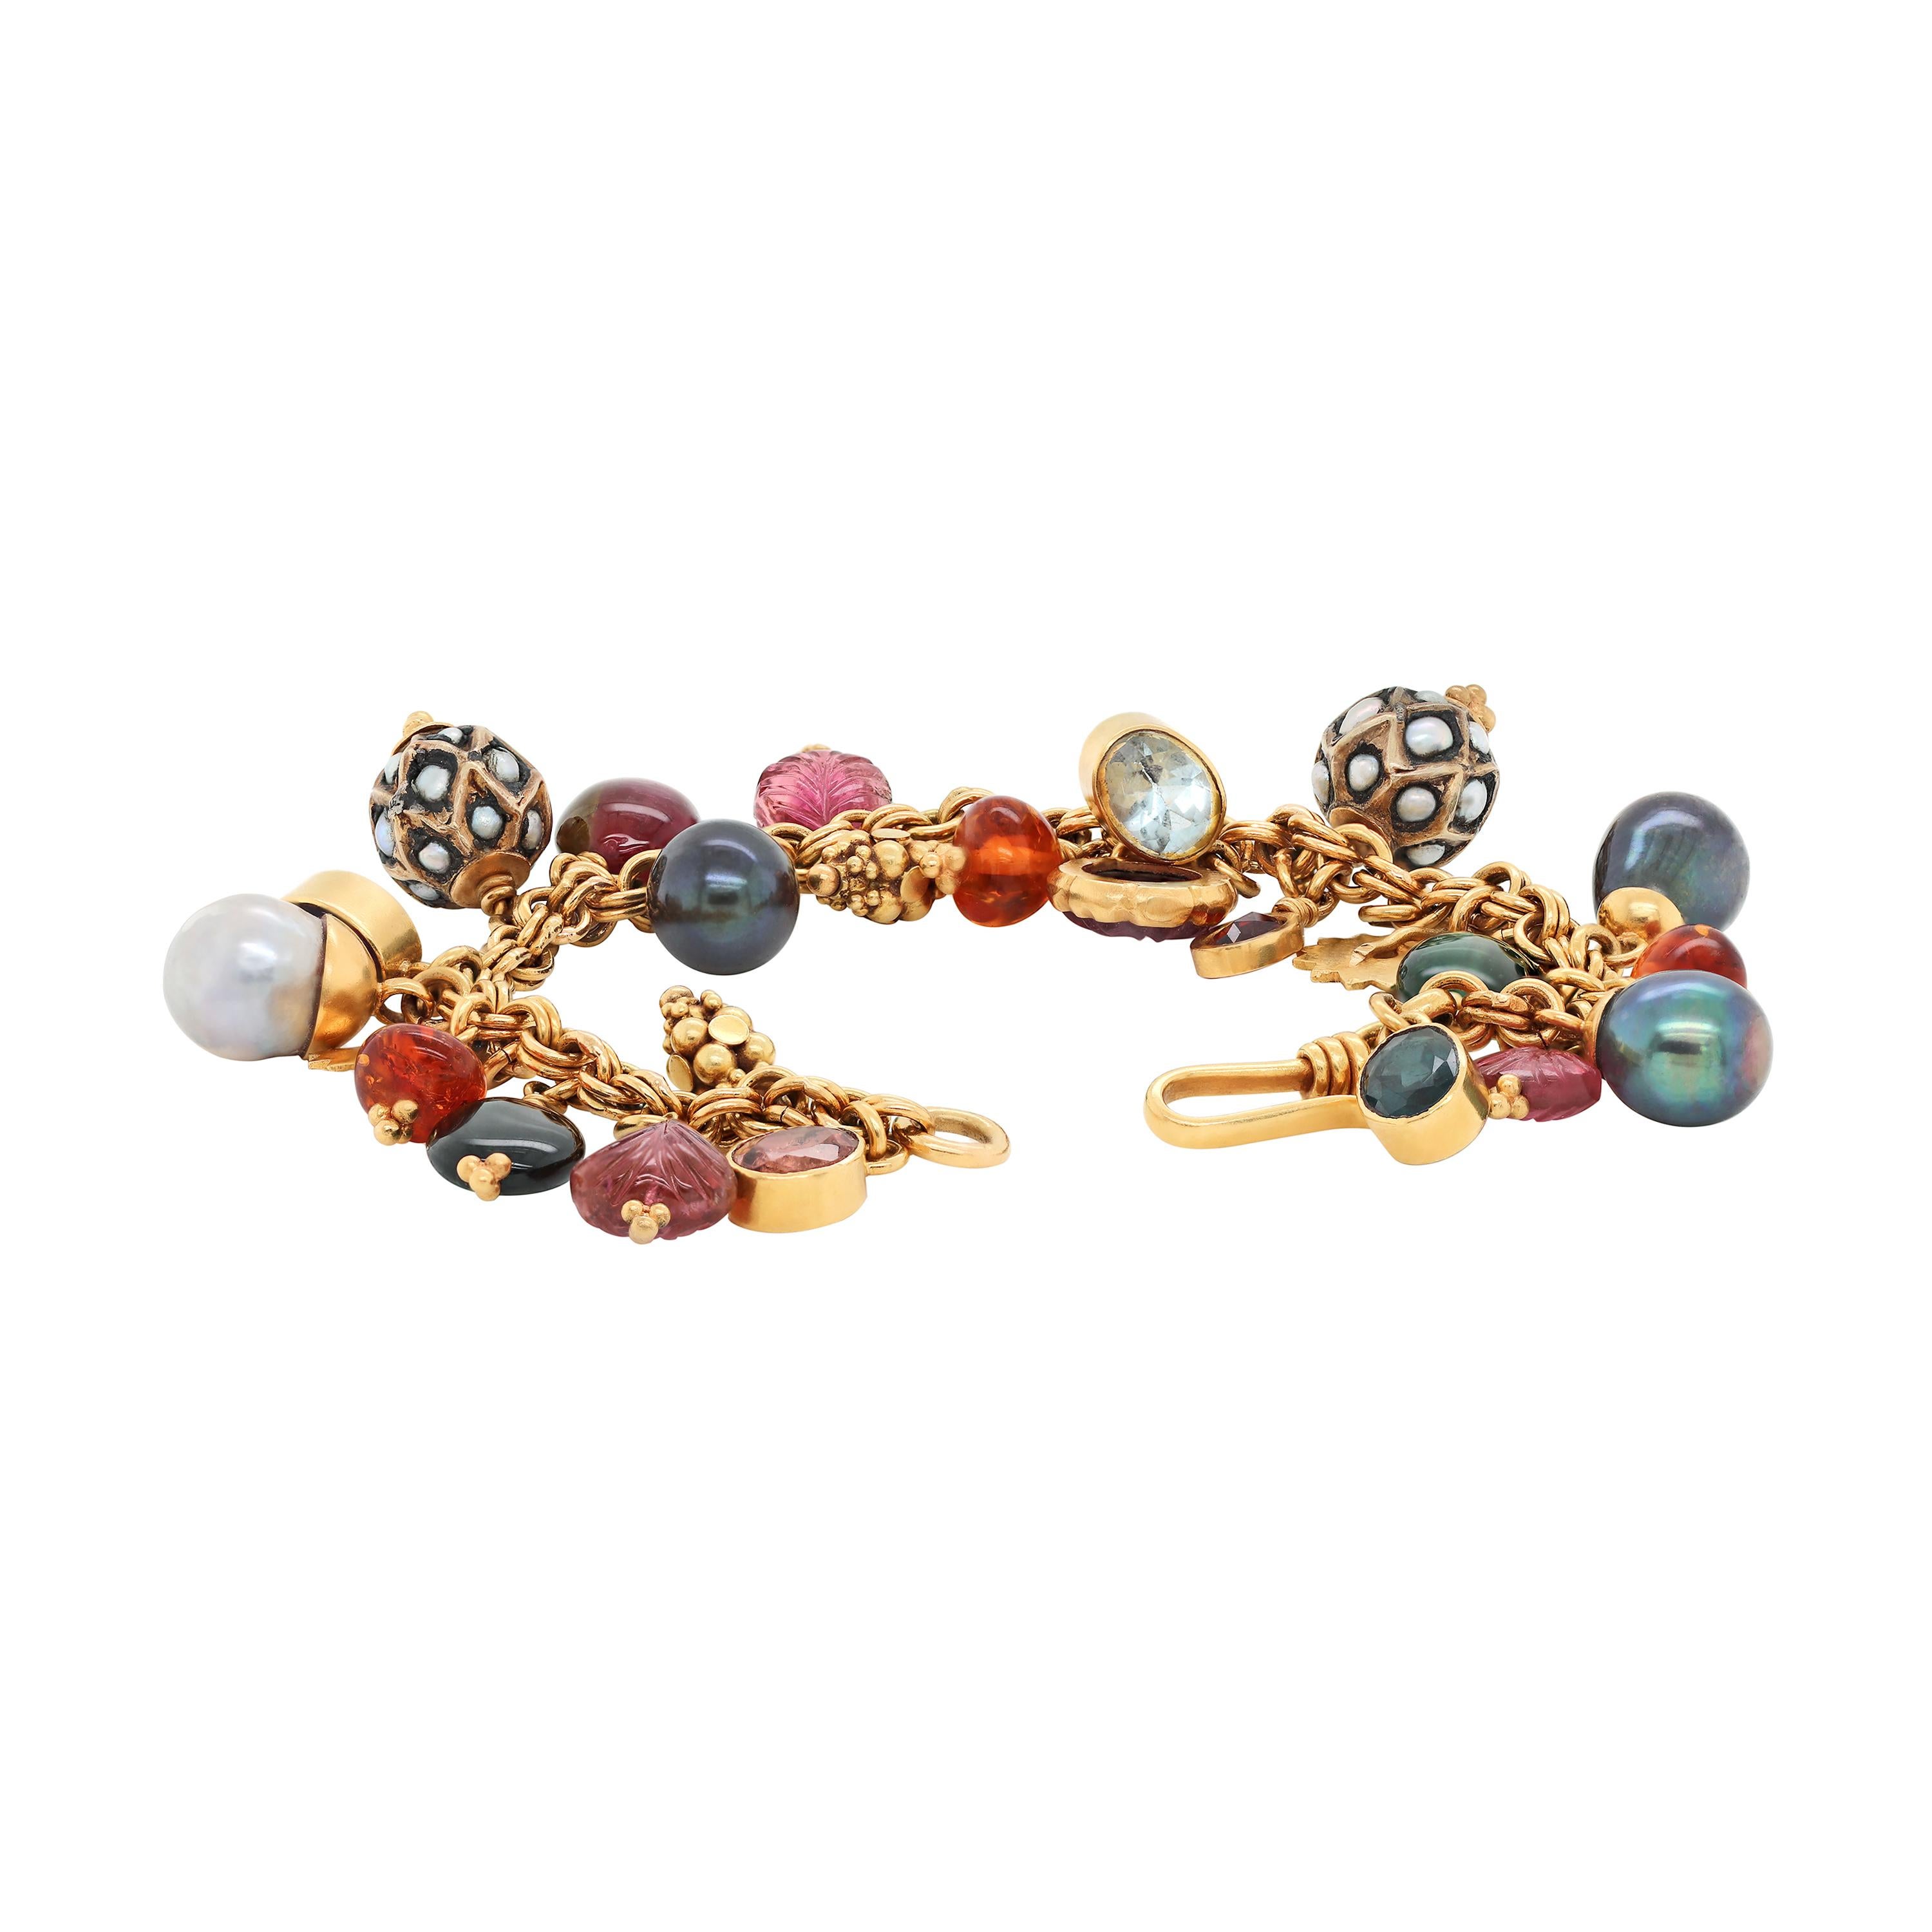 This unique charm bracelet features an assortment of beautiful semi-precious gemstones including pearls, tourmalines, citrines, aquamarines, sapphire, topaz and amethysts. All charms are attached to a double link cable chain, fitted with a secure